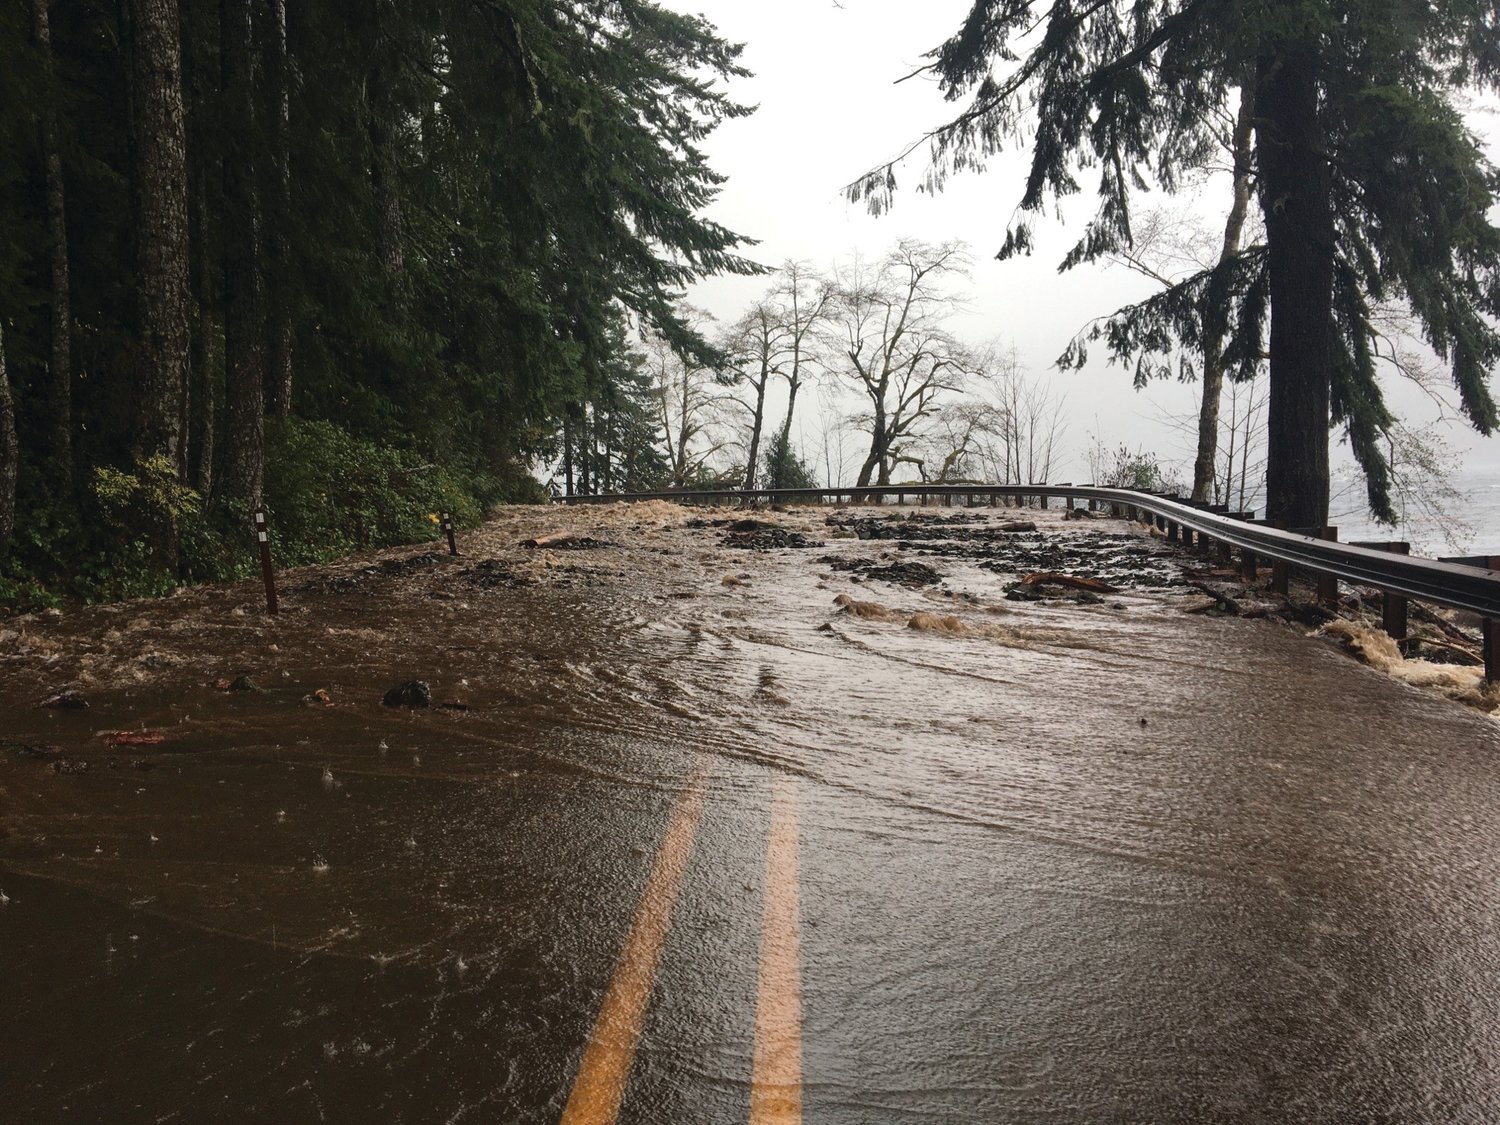 US Highway 101 around Lake Crescent was just one of many road closures in Olympic National Park after Monday’s storm caused massive flooding in the region.